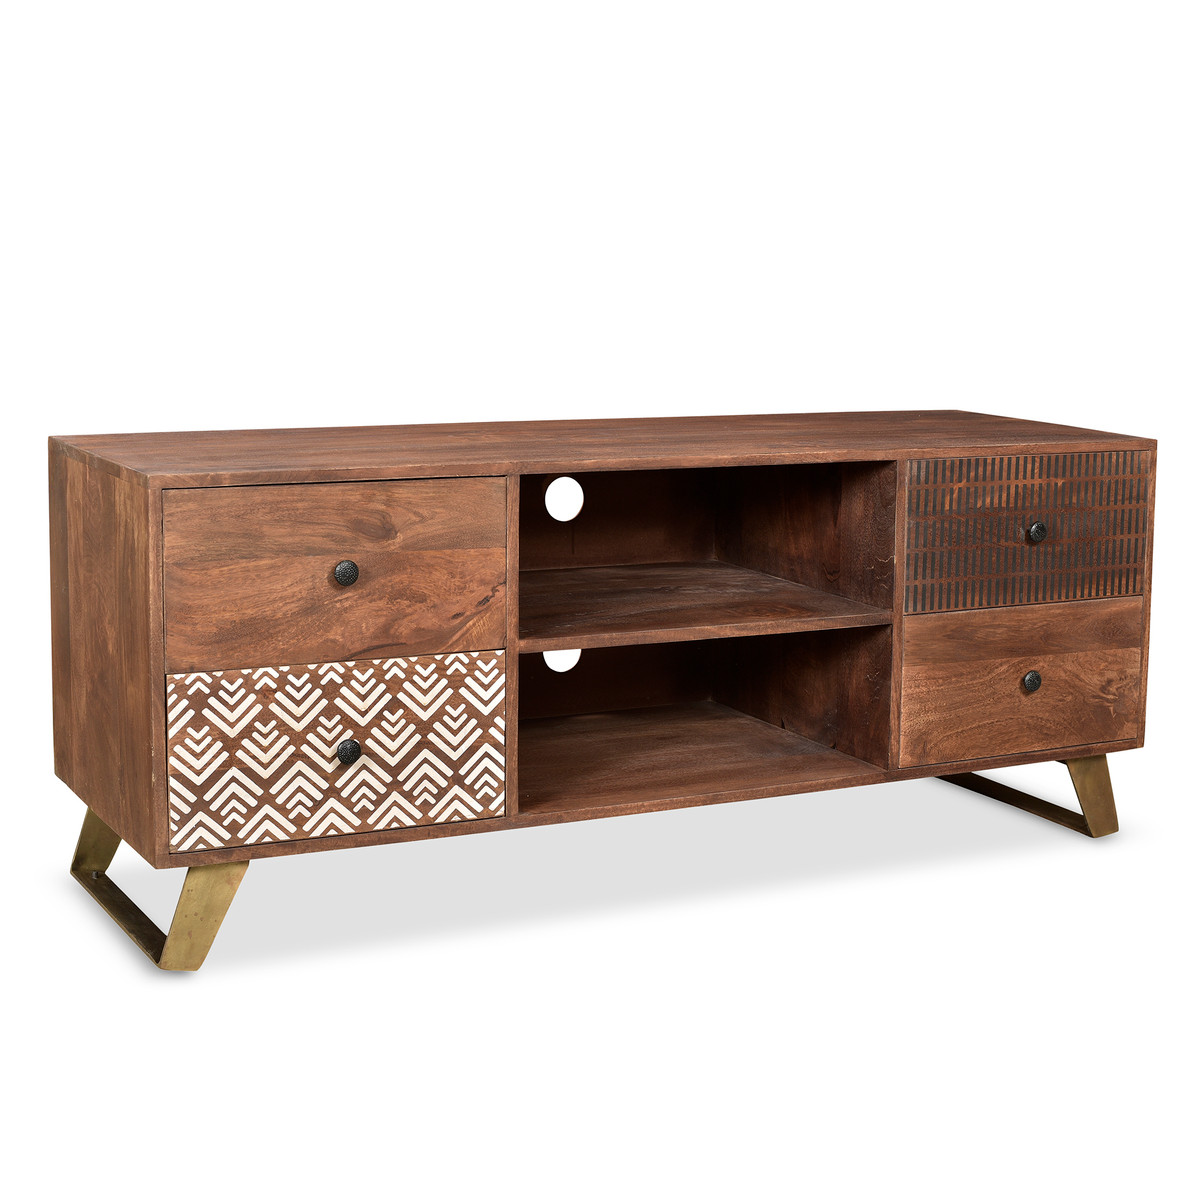 Timbergirl Olga Retro TV Console with Drawers